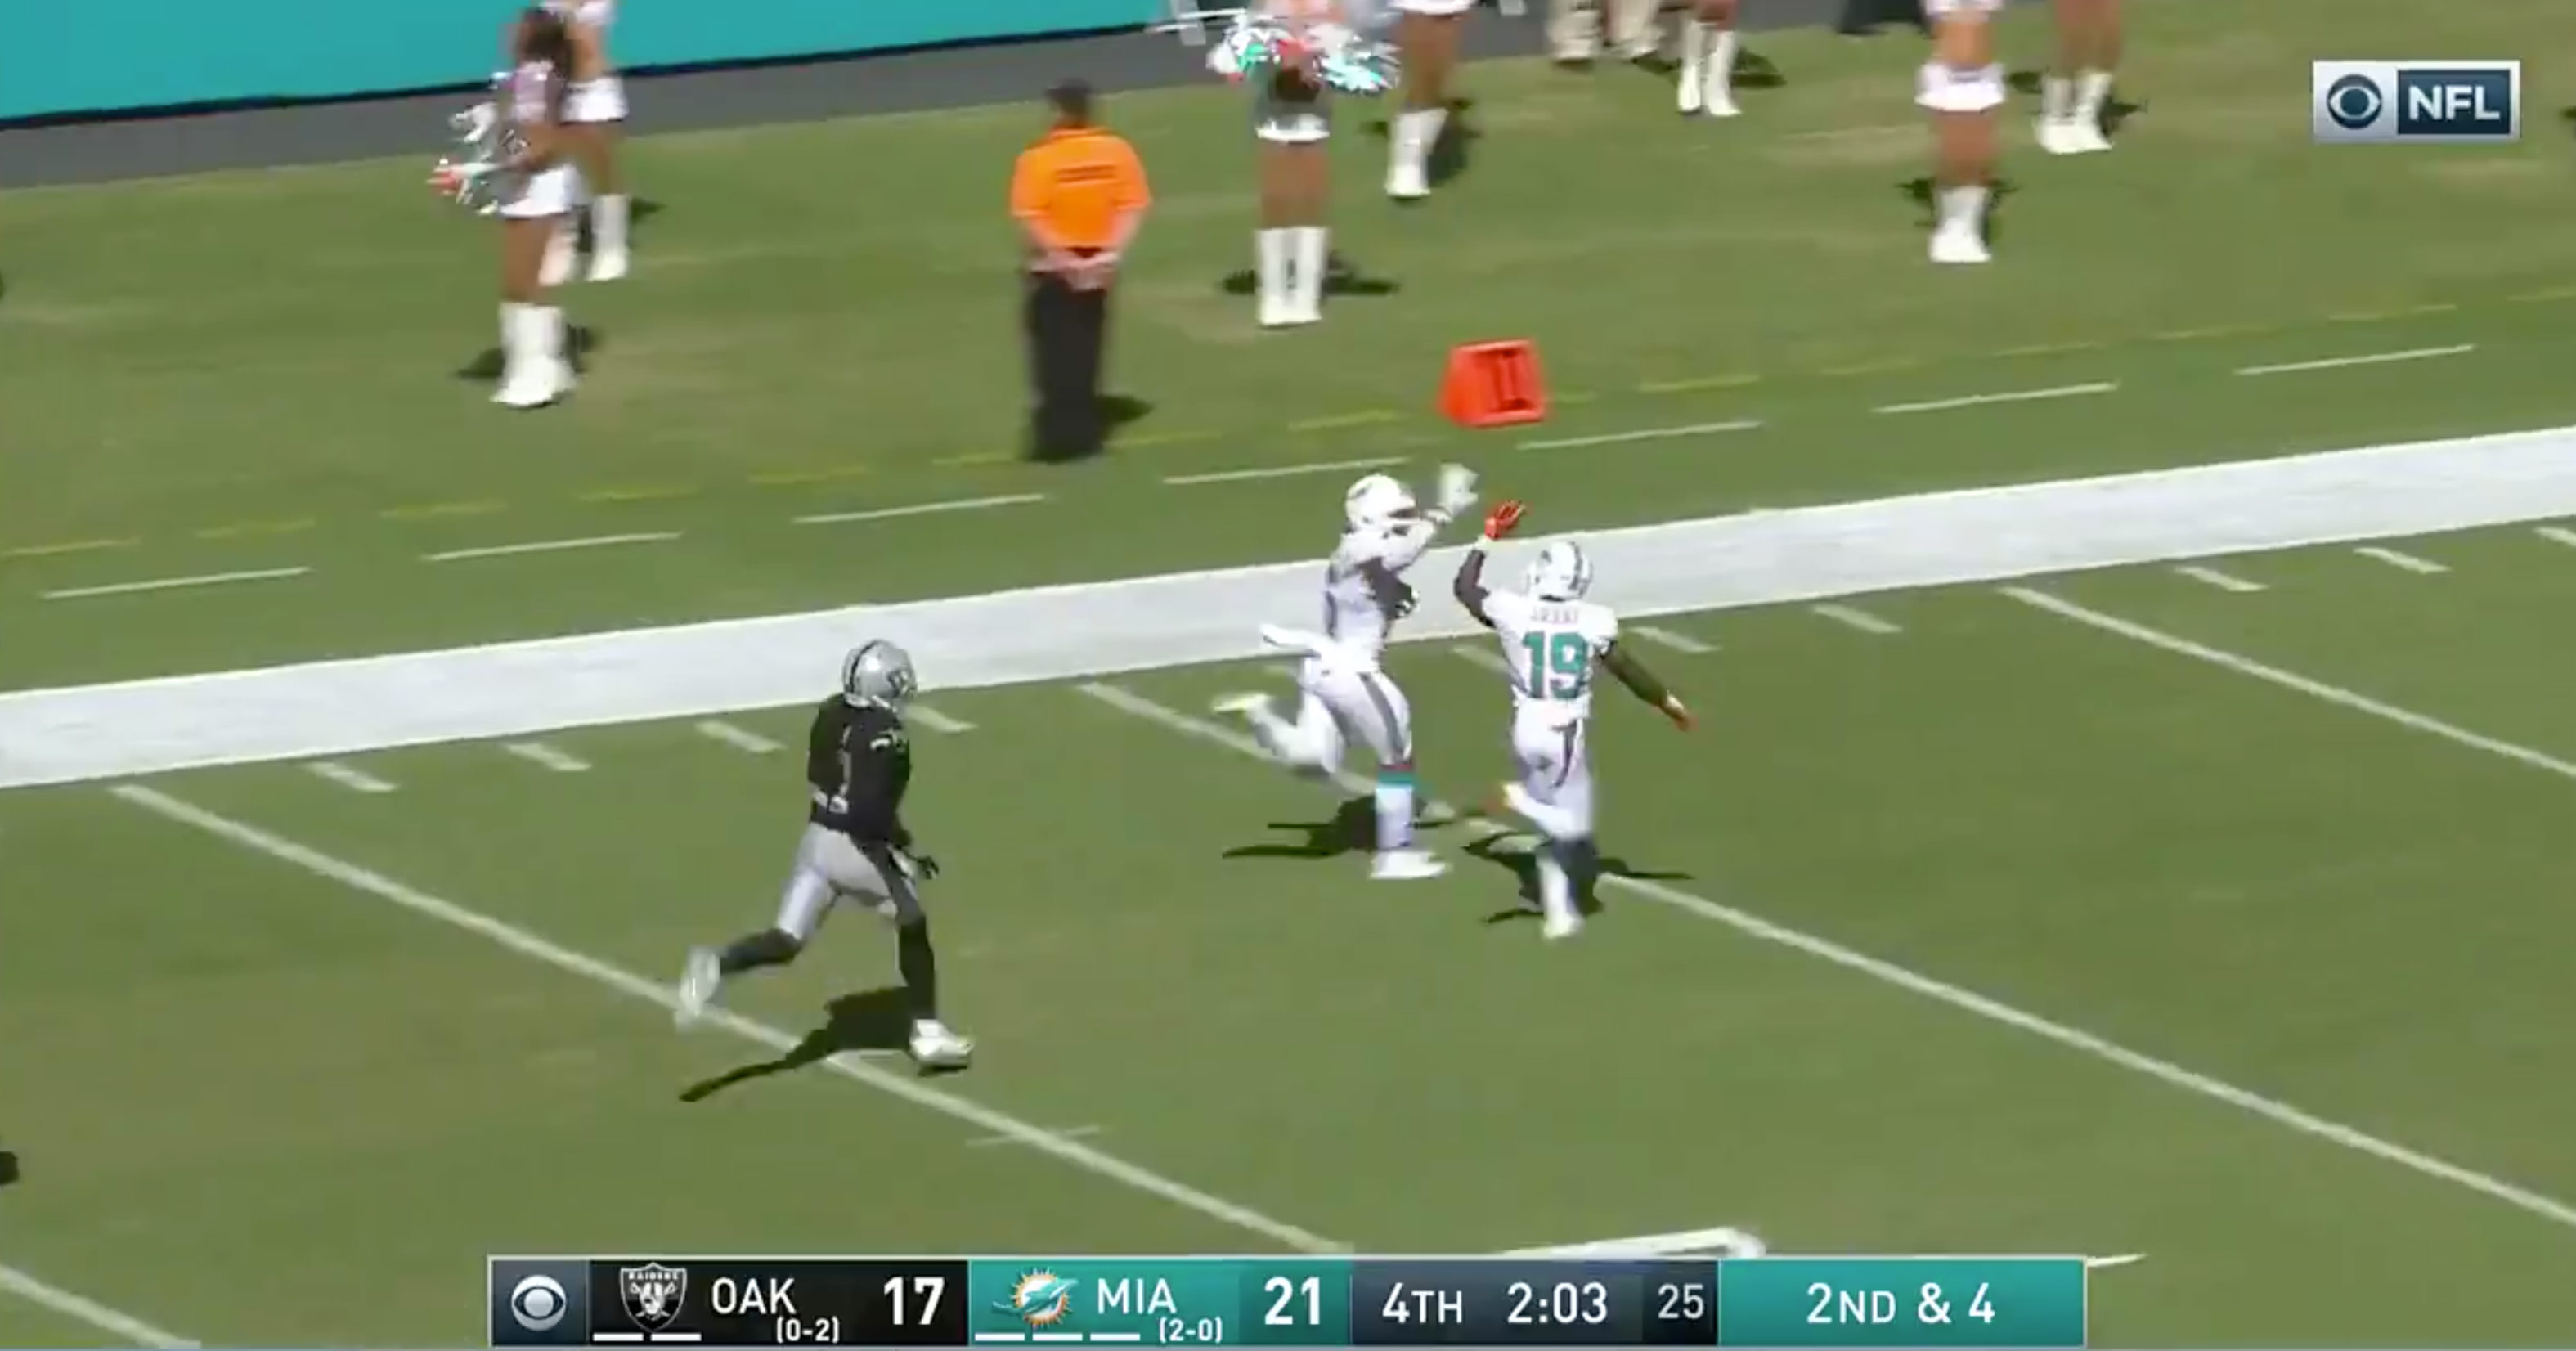 The Disrespect: Dolphins Players High-Five Each Other Mid-Play On Way To Endzone (VIDEO)3150 x 1652